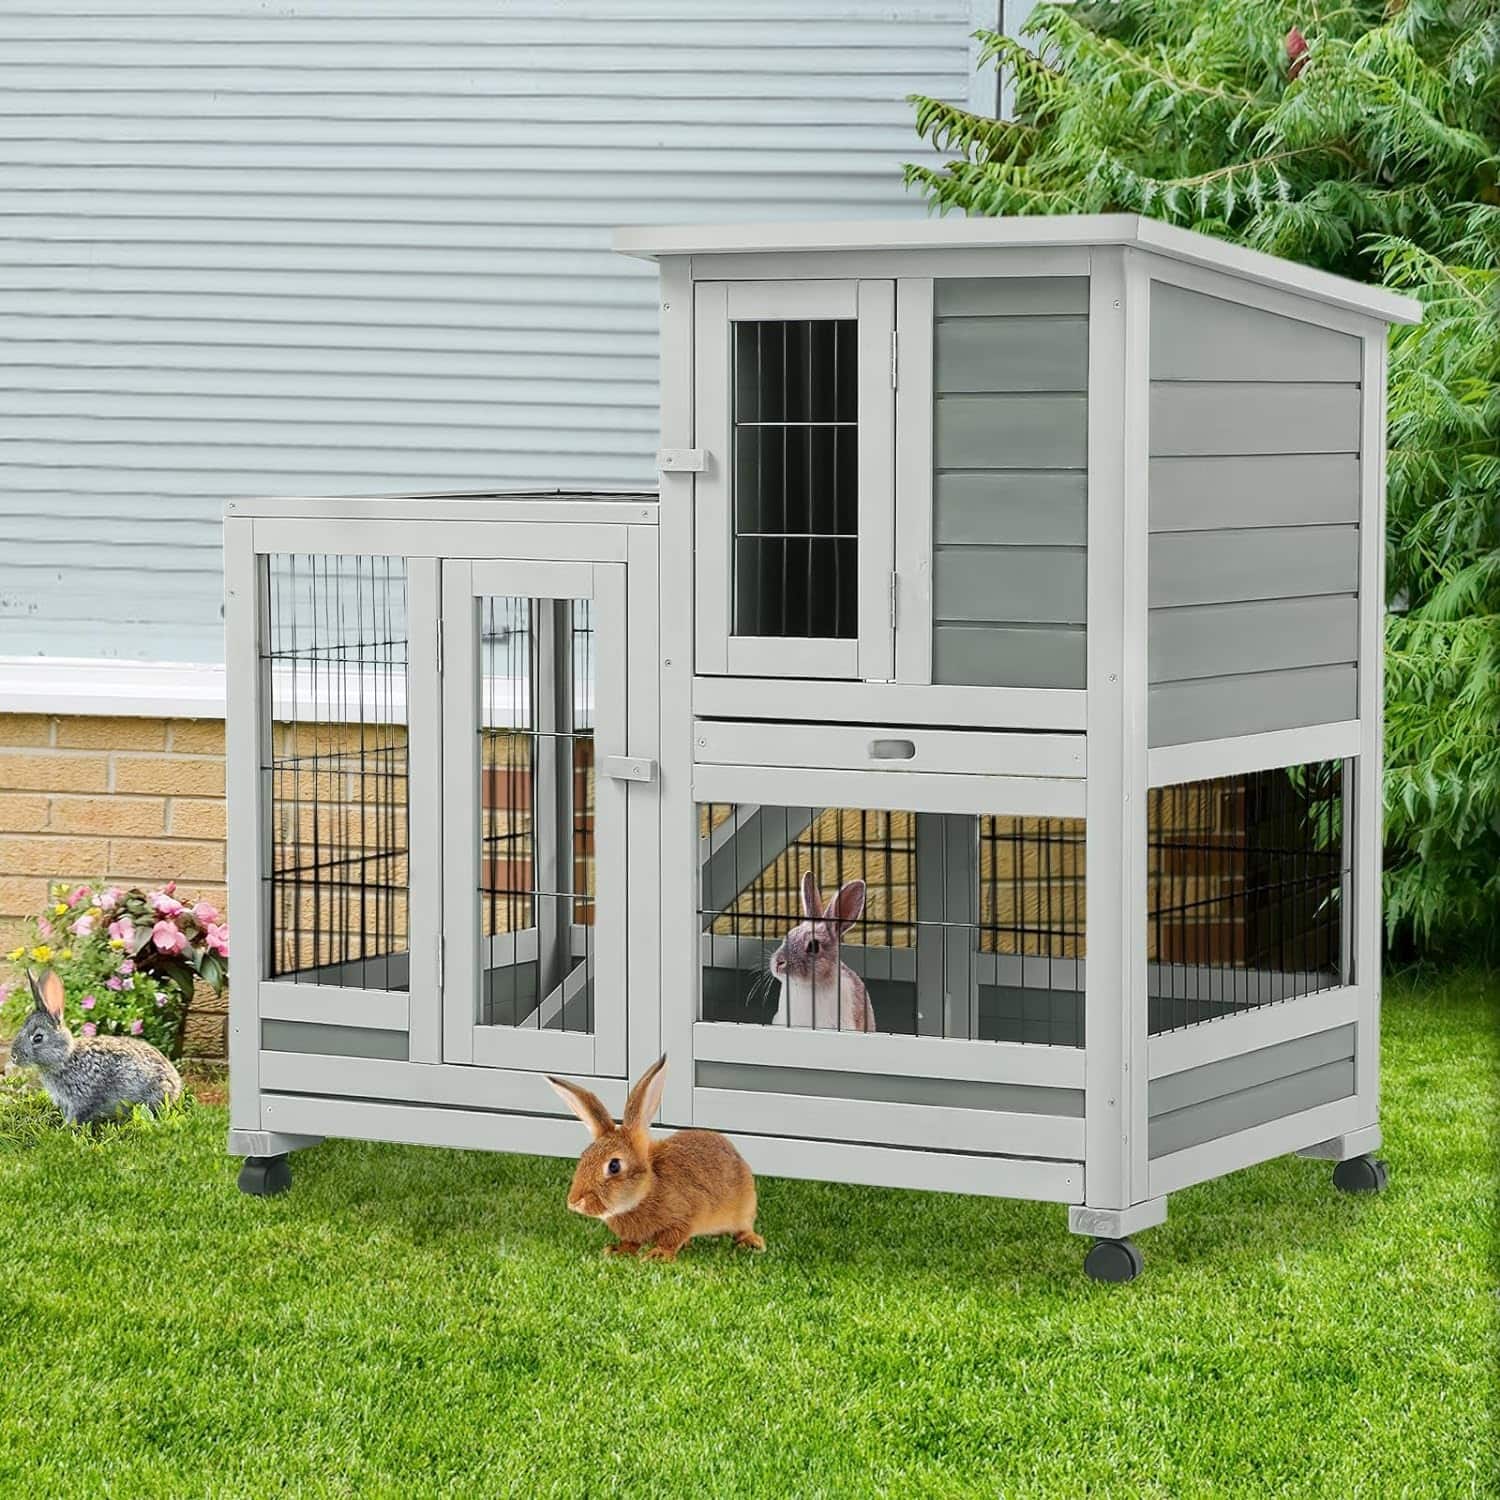 AECOJOY Indoor Wooden Rabbit Hutch Pet House for Small Animals with Run ...